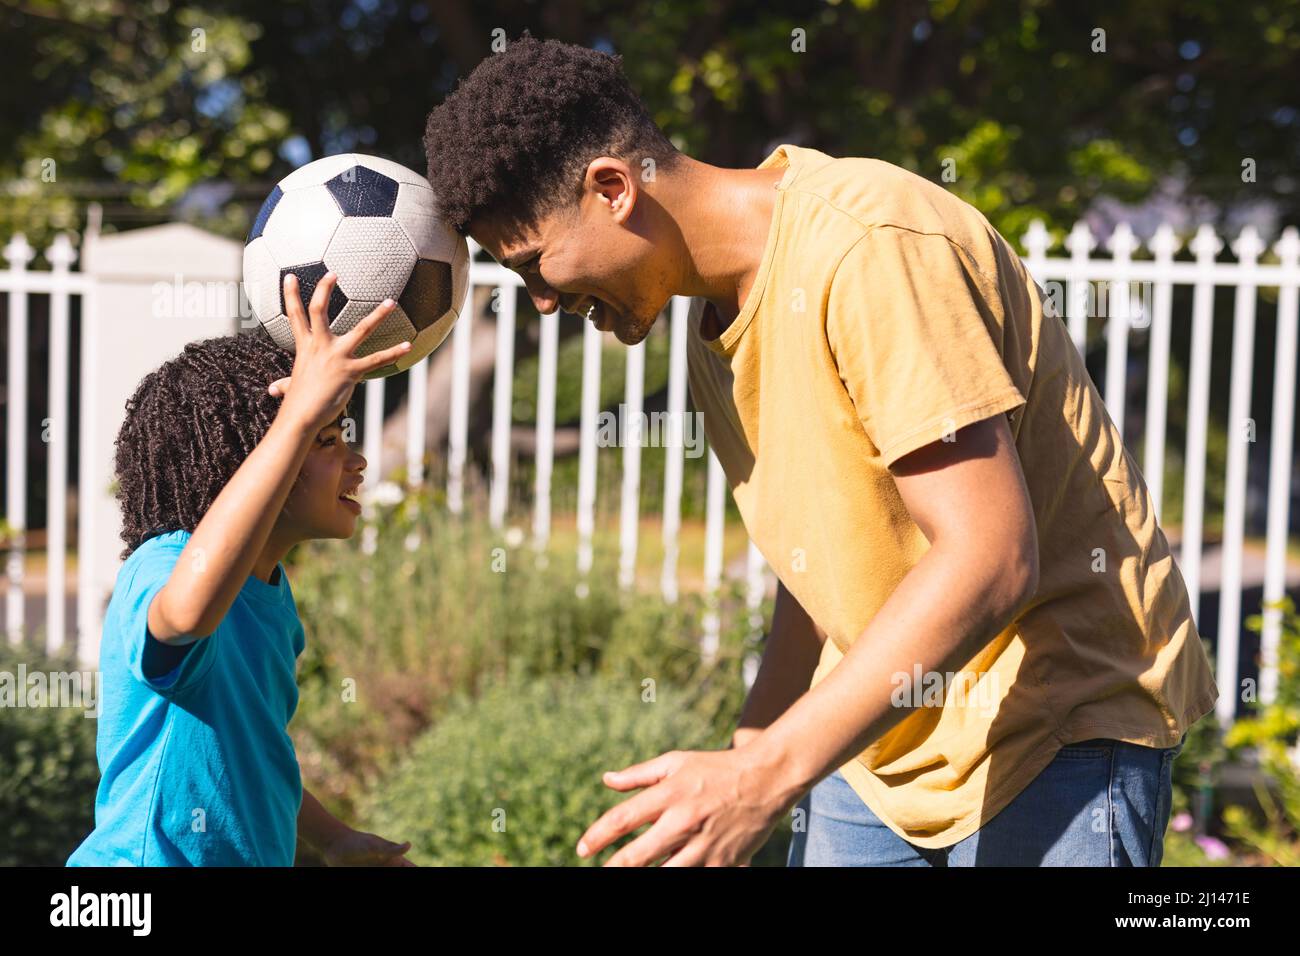 Side view of father and son playing with soccer ball at backyard on sunny day Stock Photo